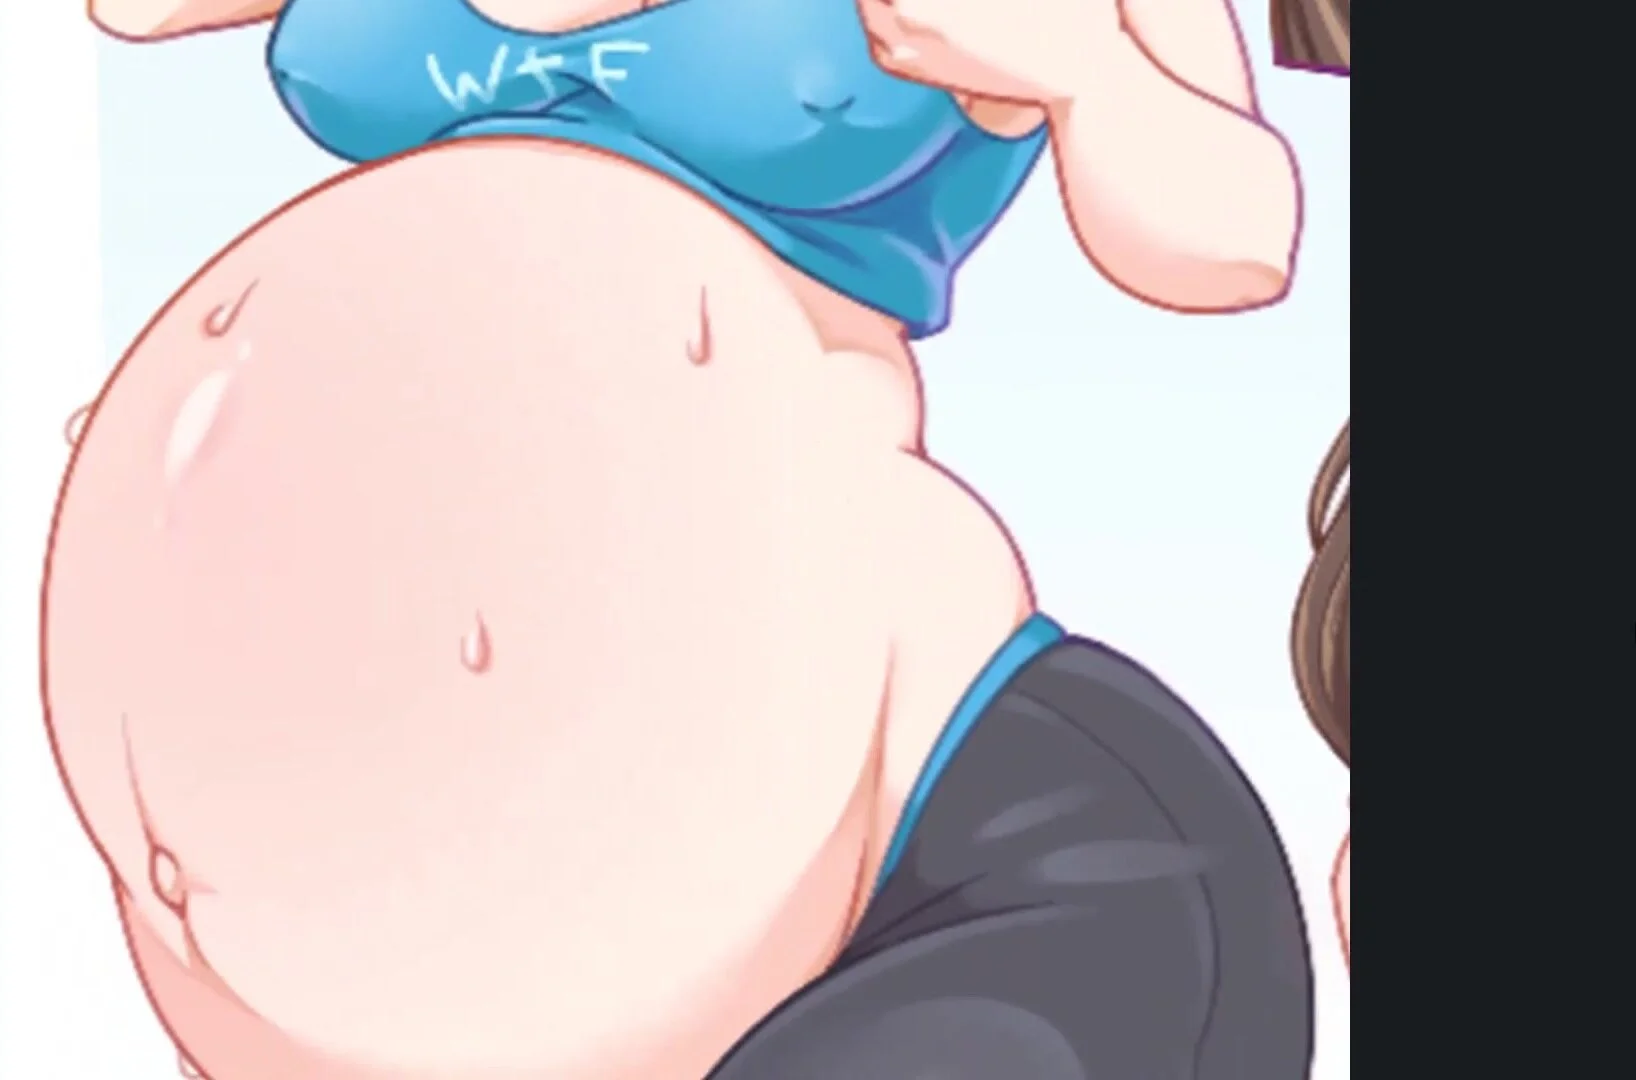 Wii Fit Anal Porn - Wii Fit Trainer Gets Hydrated - ThisVid.com